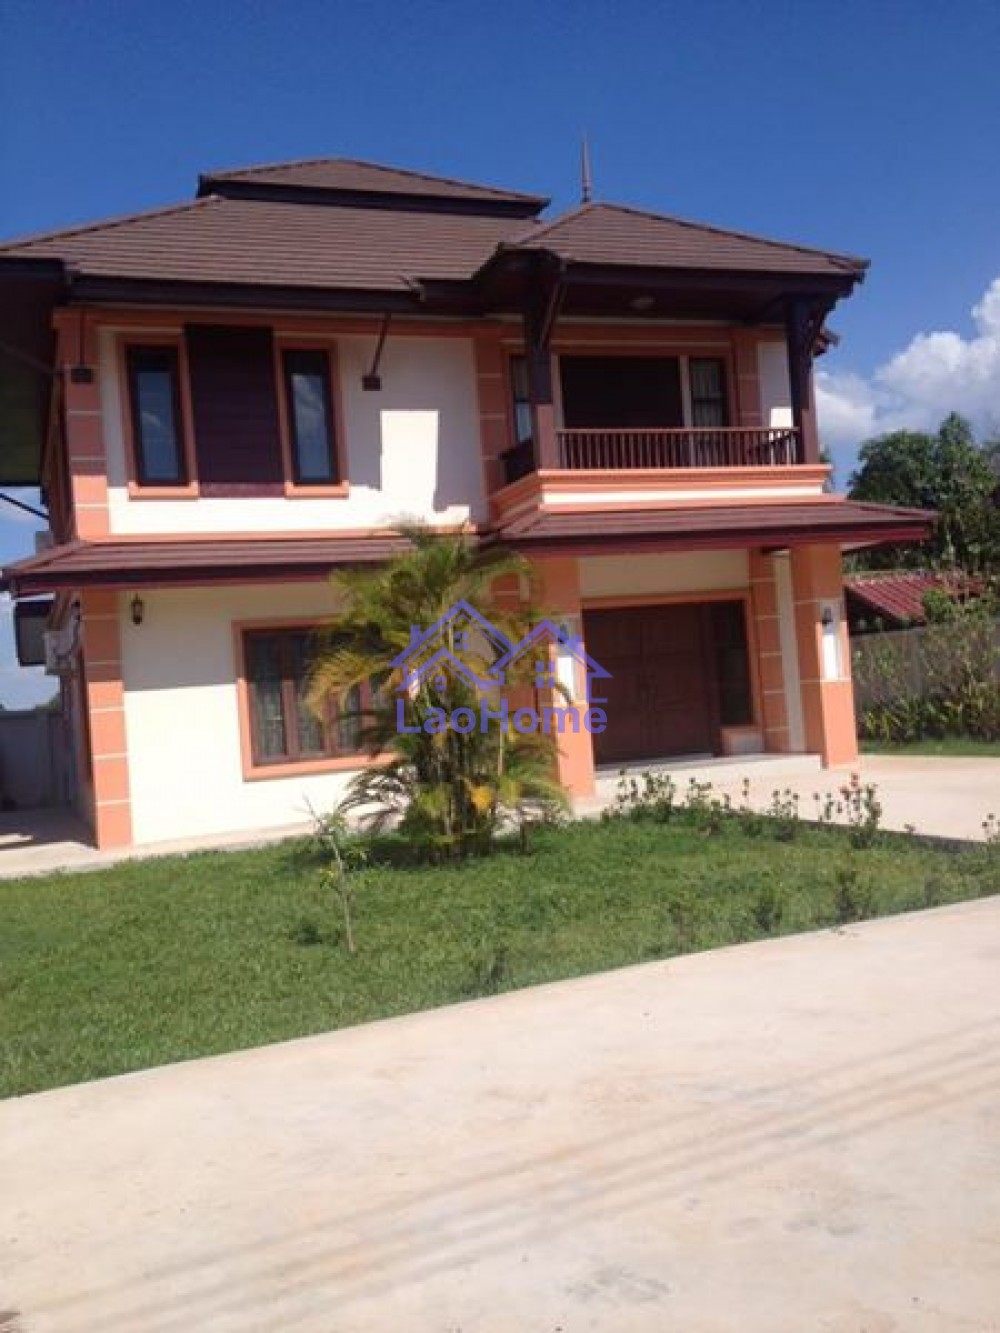 Nice two story house for sale